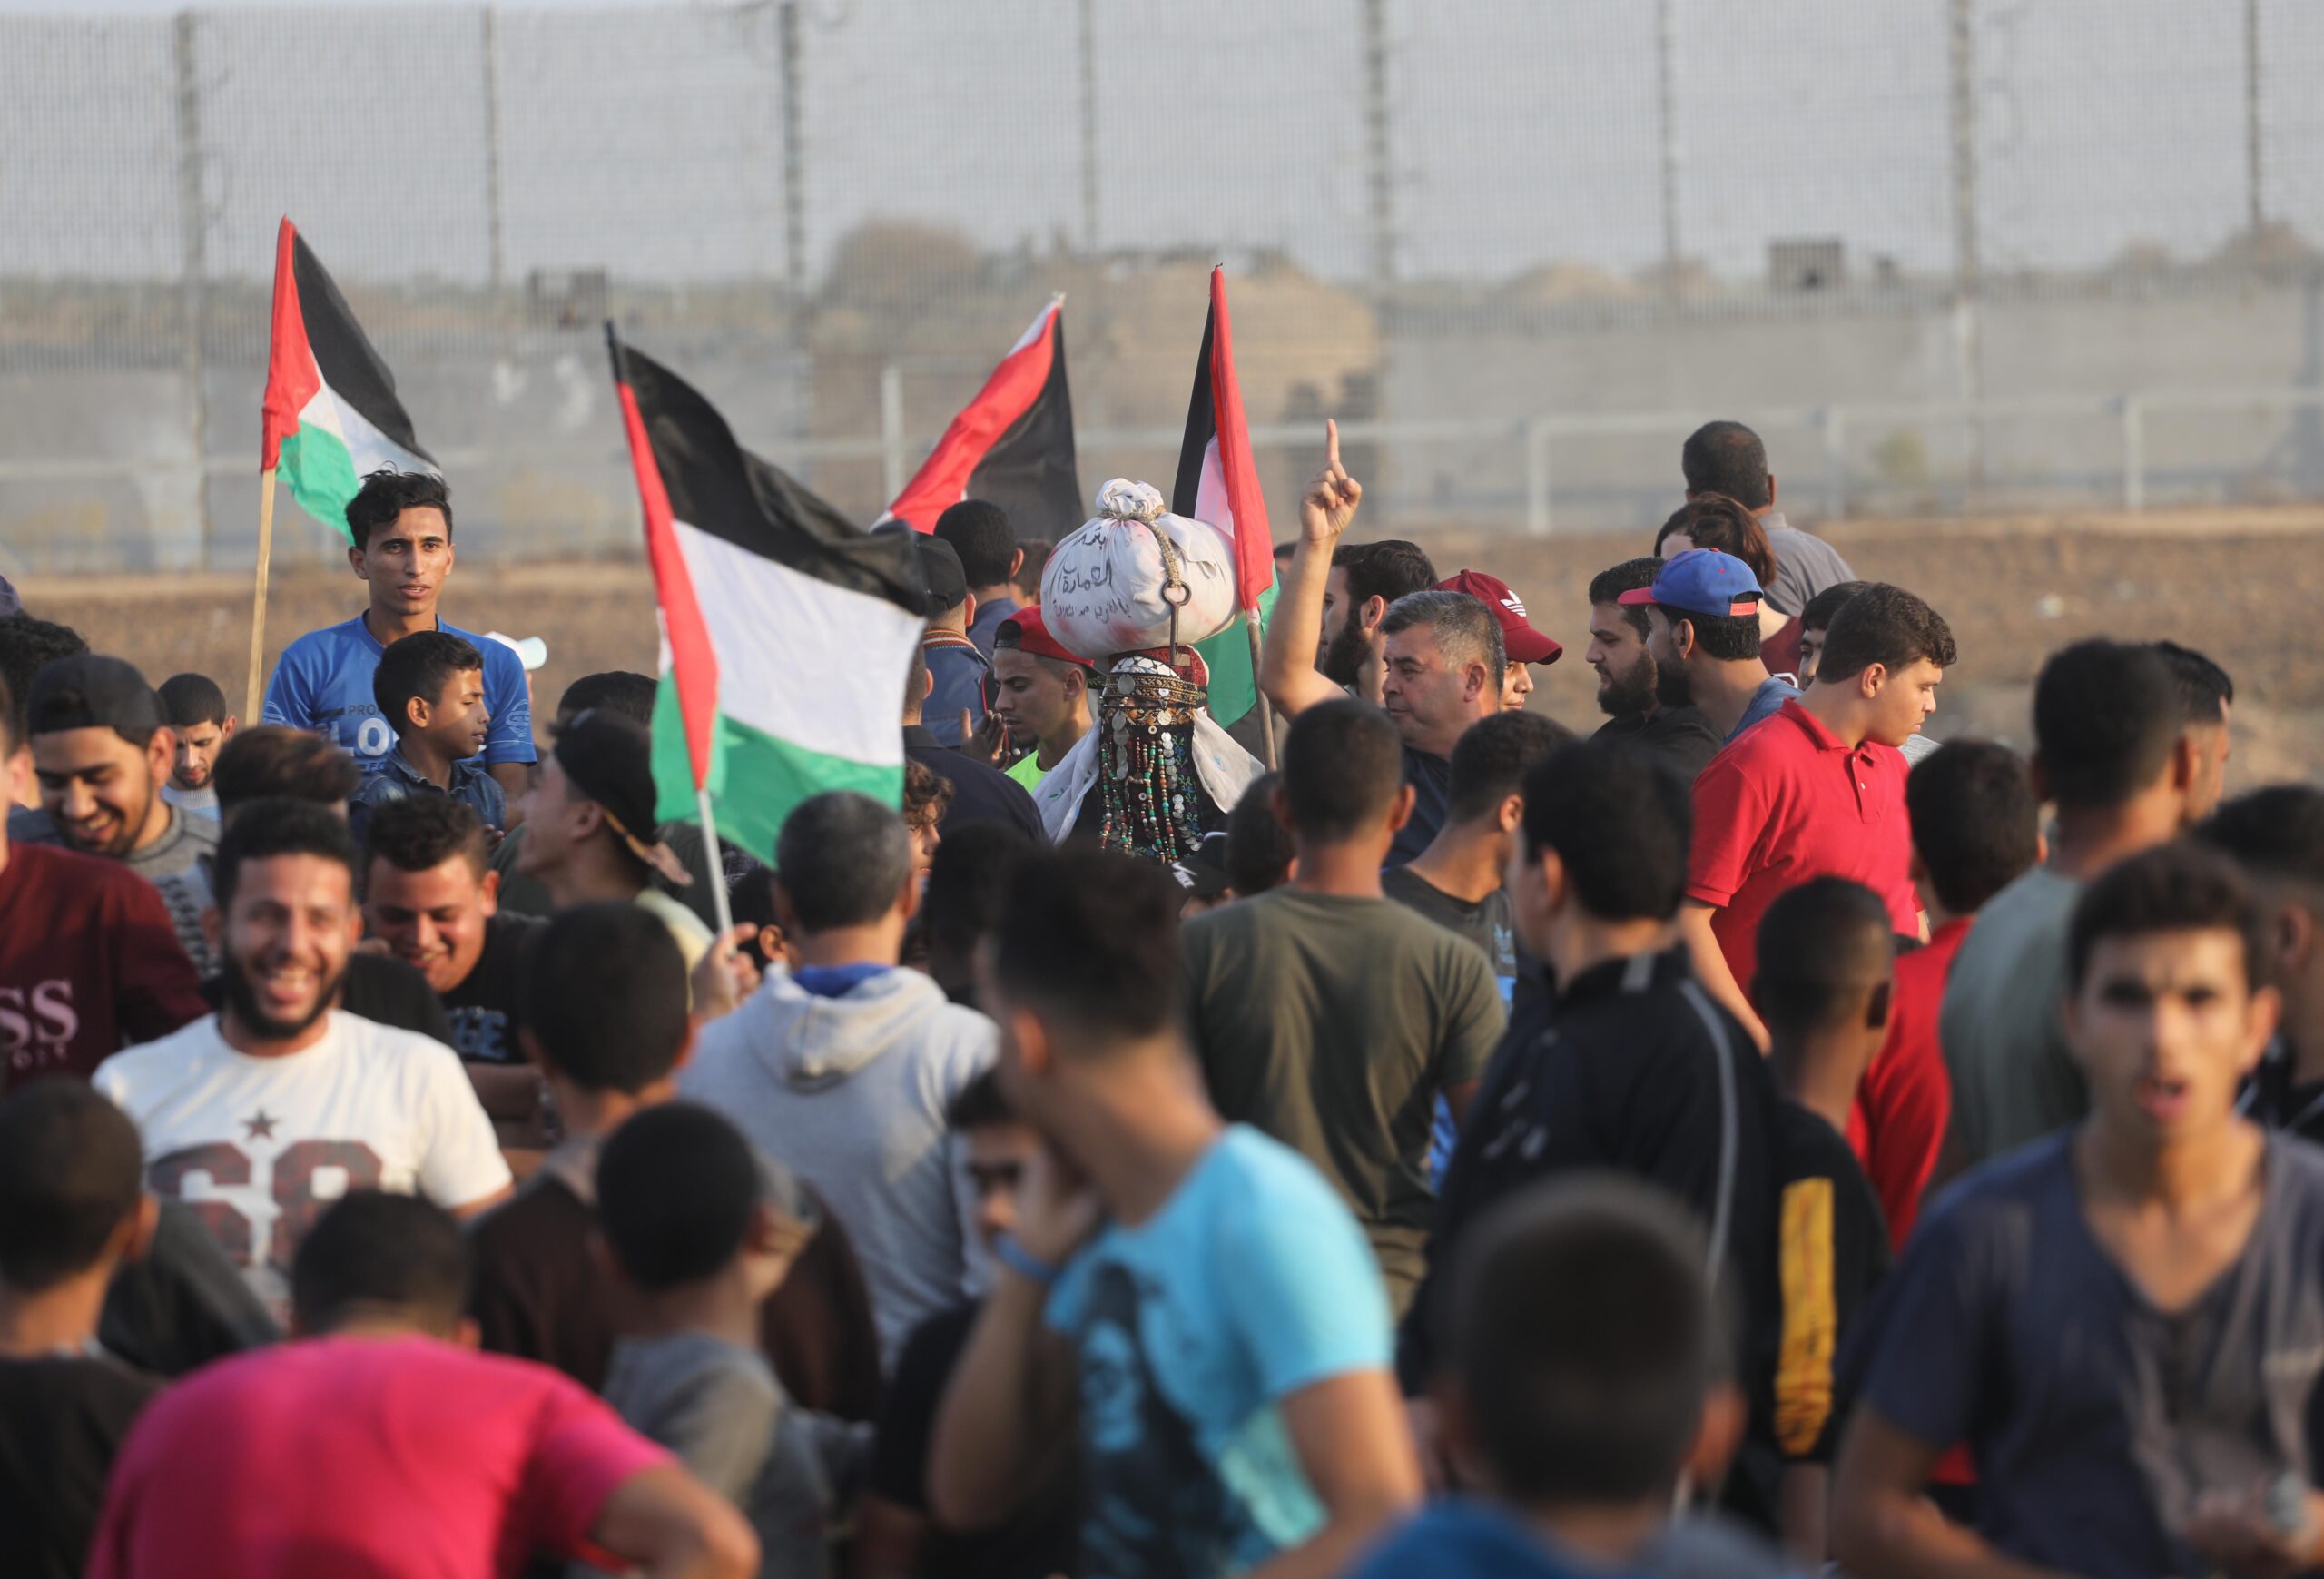 Palestinians gather at the separation fence for the Great March of Return on 8 November 2019 [Mohammed Asad/Middle East Monitor]